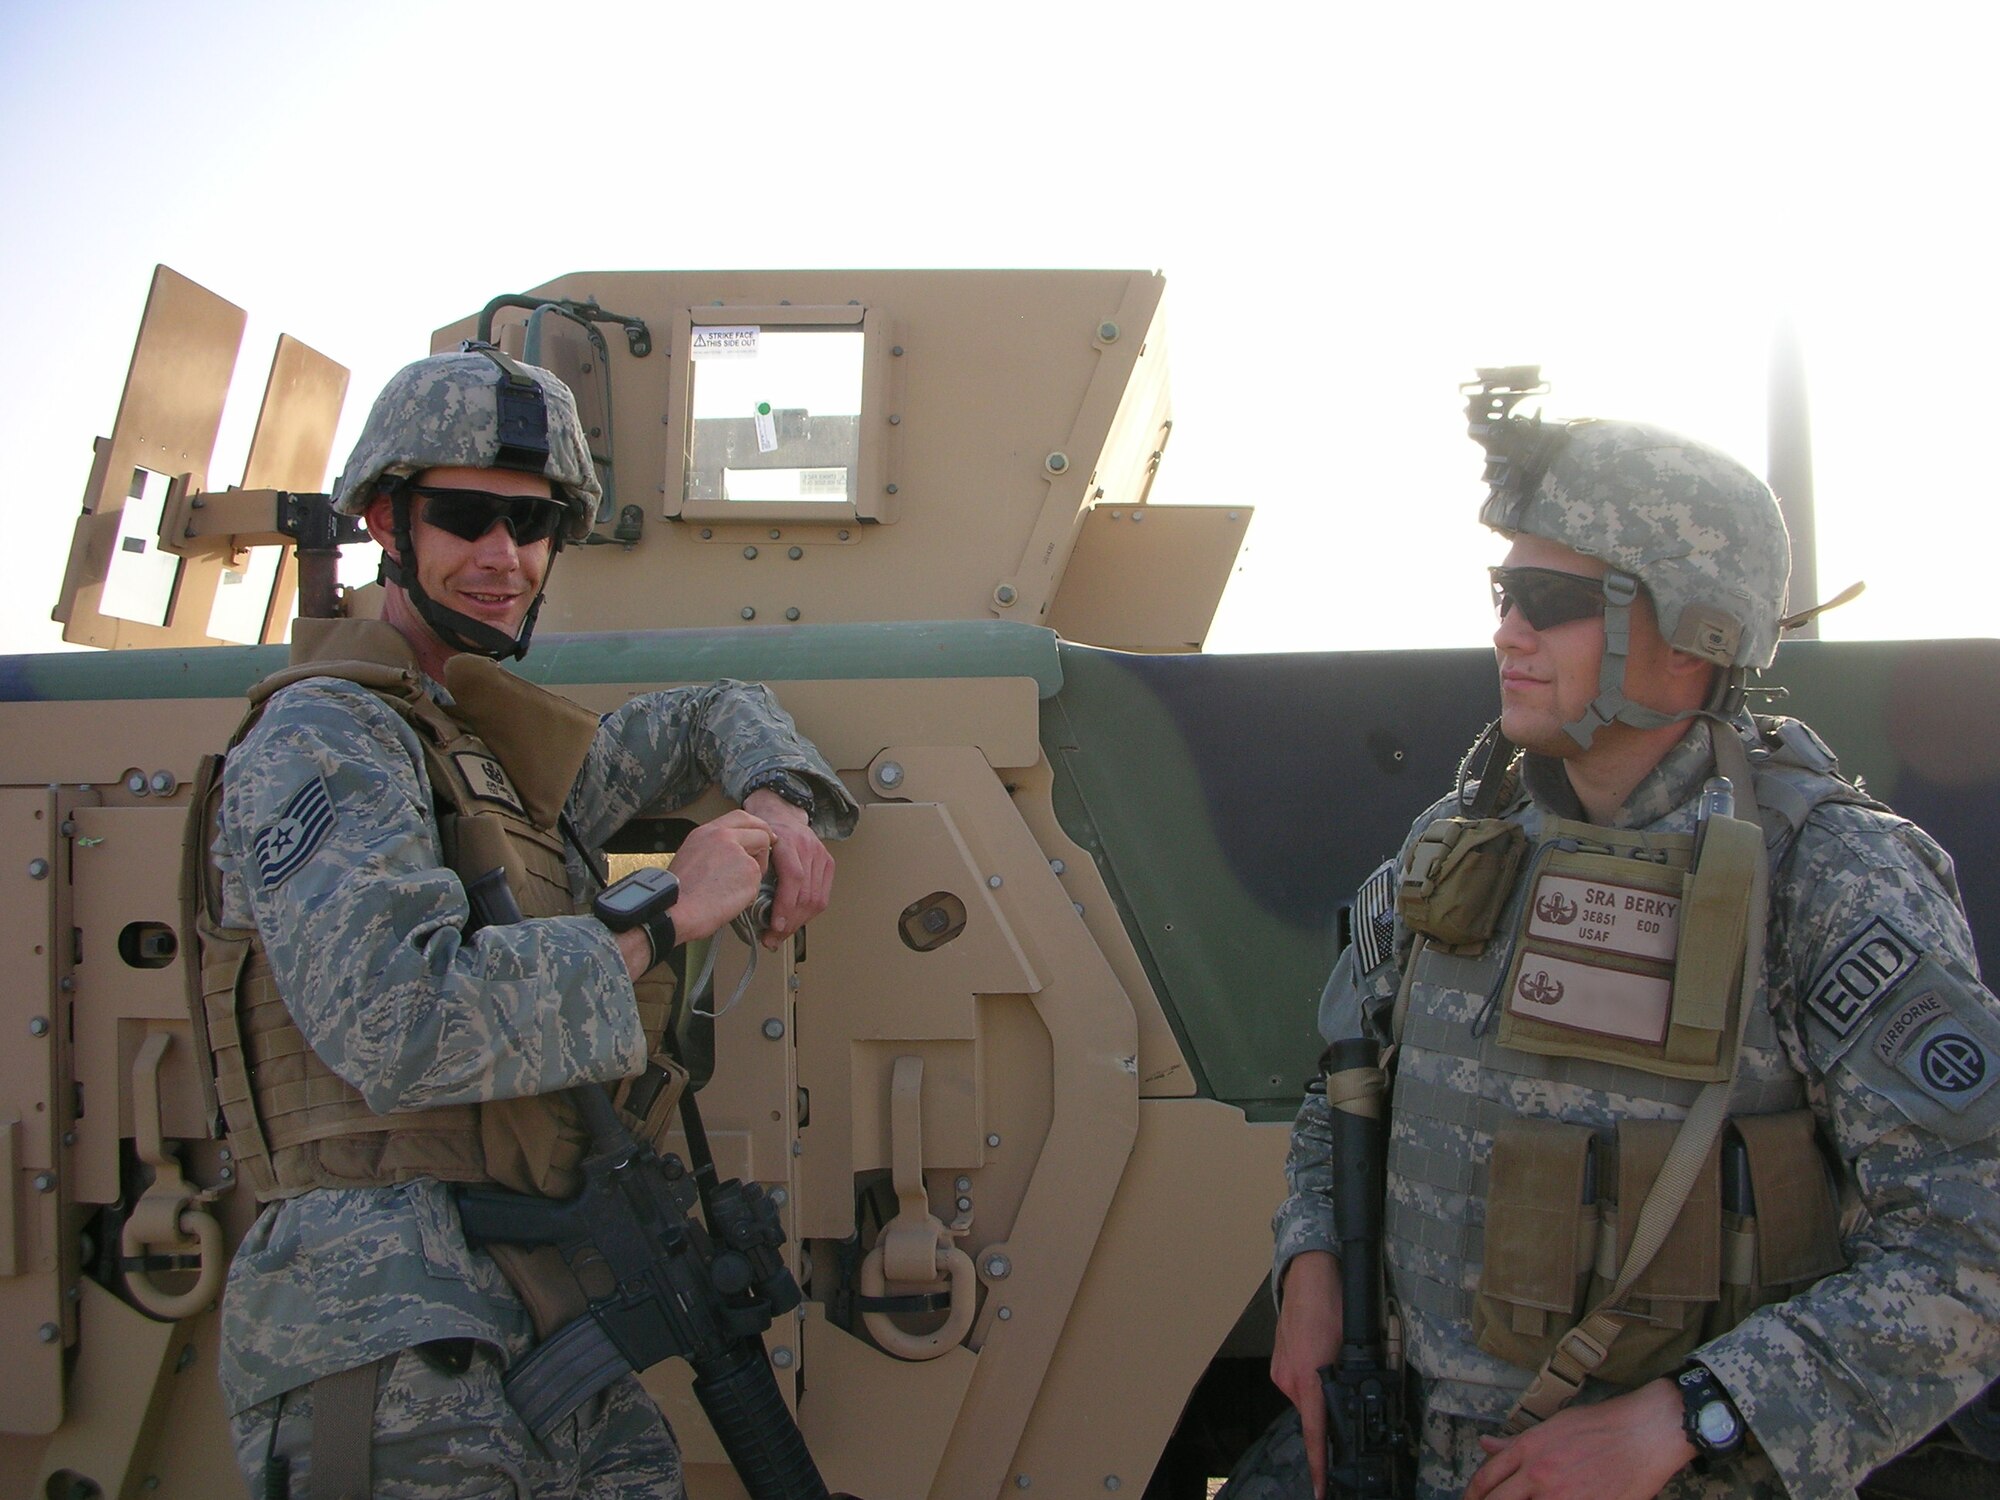 Tech. Sgt. John Carrol (left) and Senior Airman Bryan Berky, 755th Expeditionary Mission Support Group, Explosive Ordinance Disposal Company Bravo, take a break during an improvised explosive device detection operation in the Nimruz Province, Afghanistan, July 4, 2007.  Ellsworth has more than 400 total military members deployed to various locations worldwide in support of the Global War on Terror. (U.S. Air Force photo/courtesy photo)